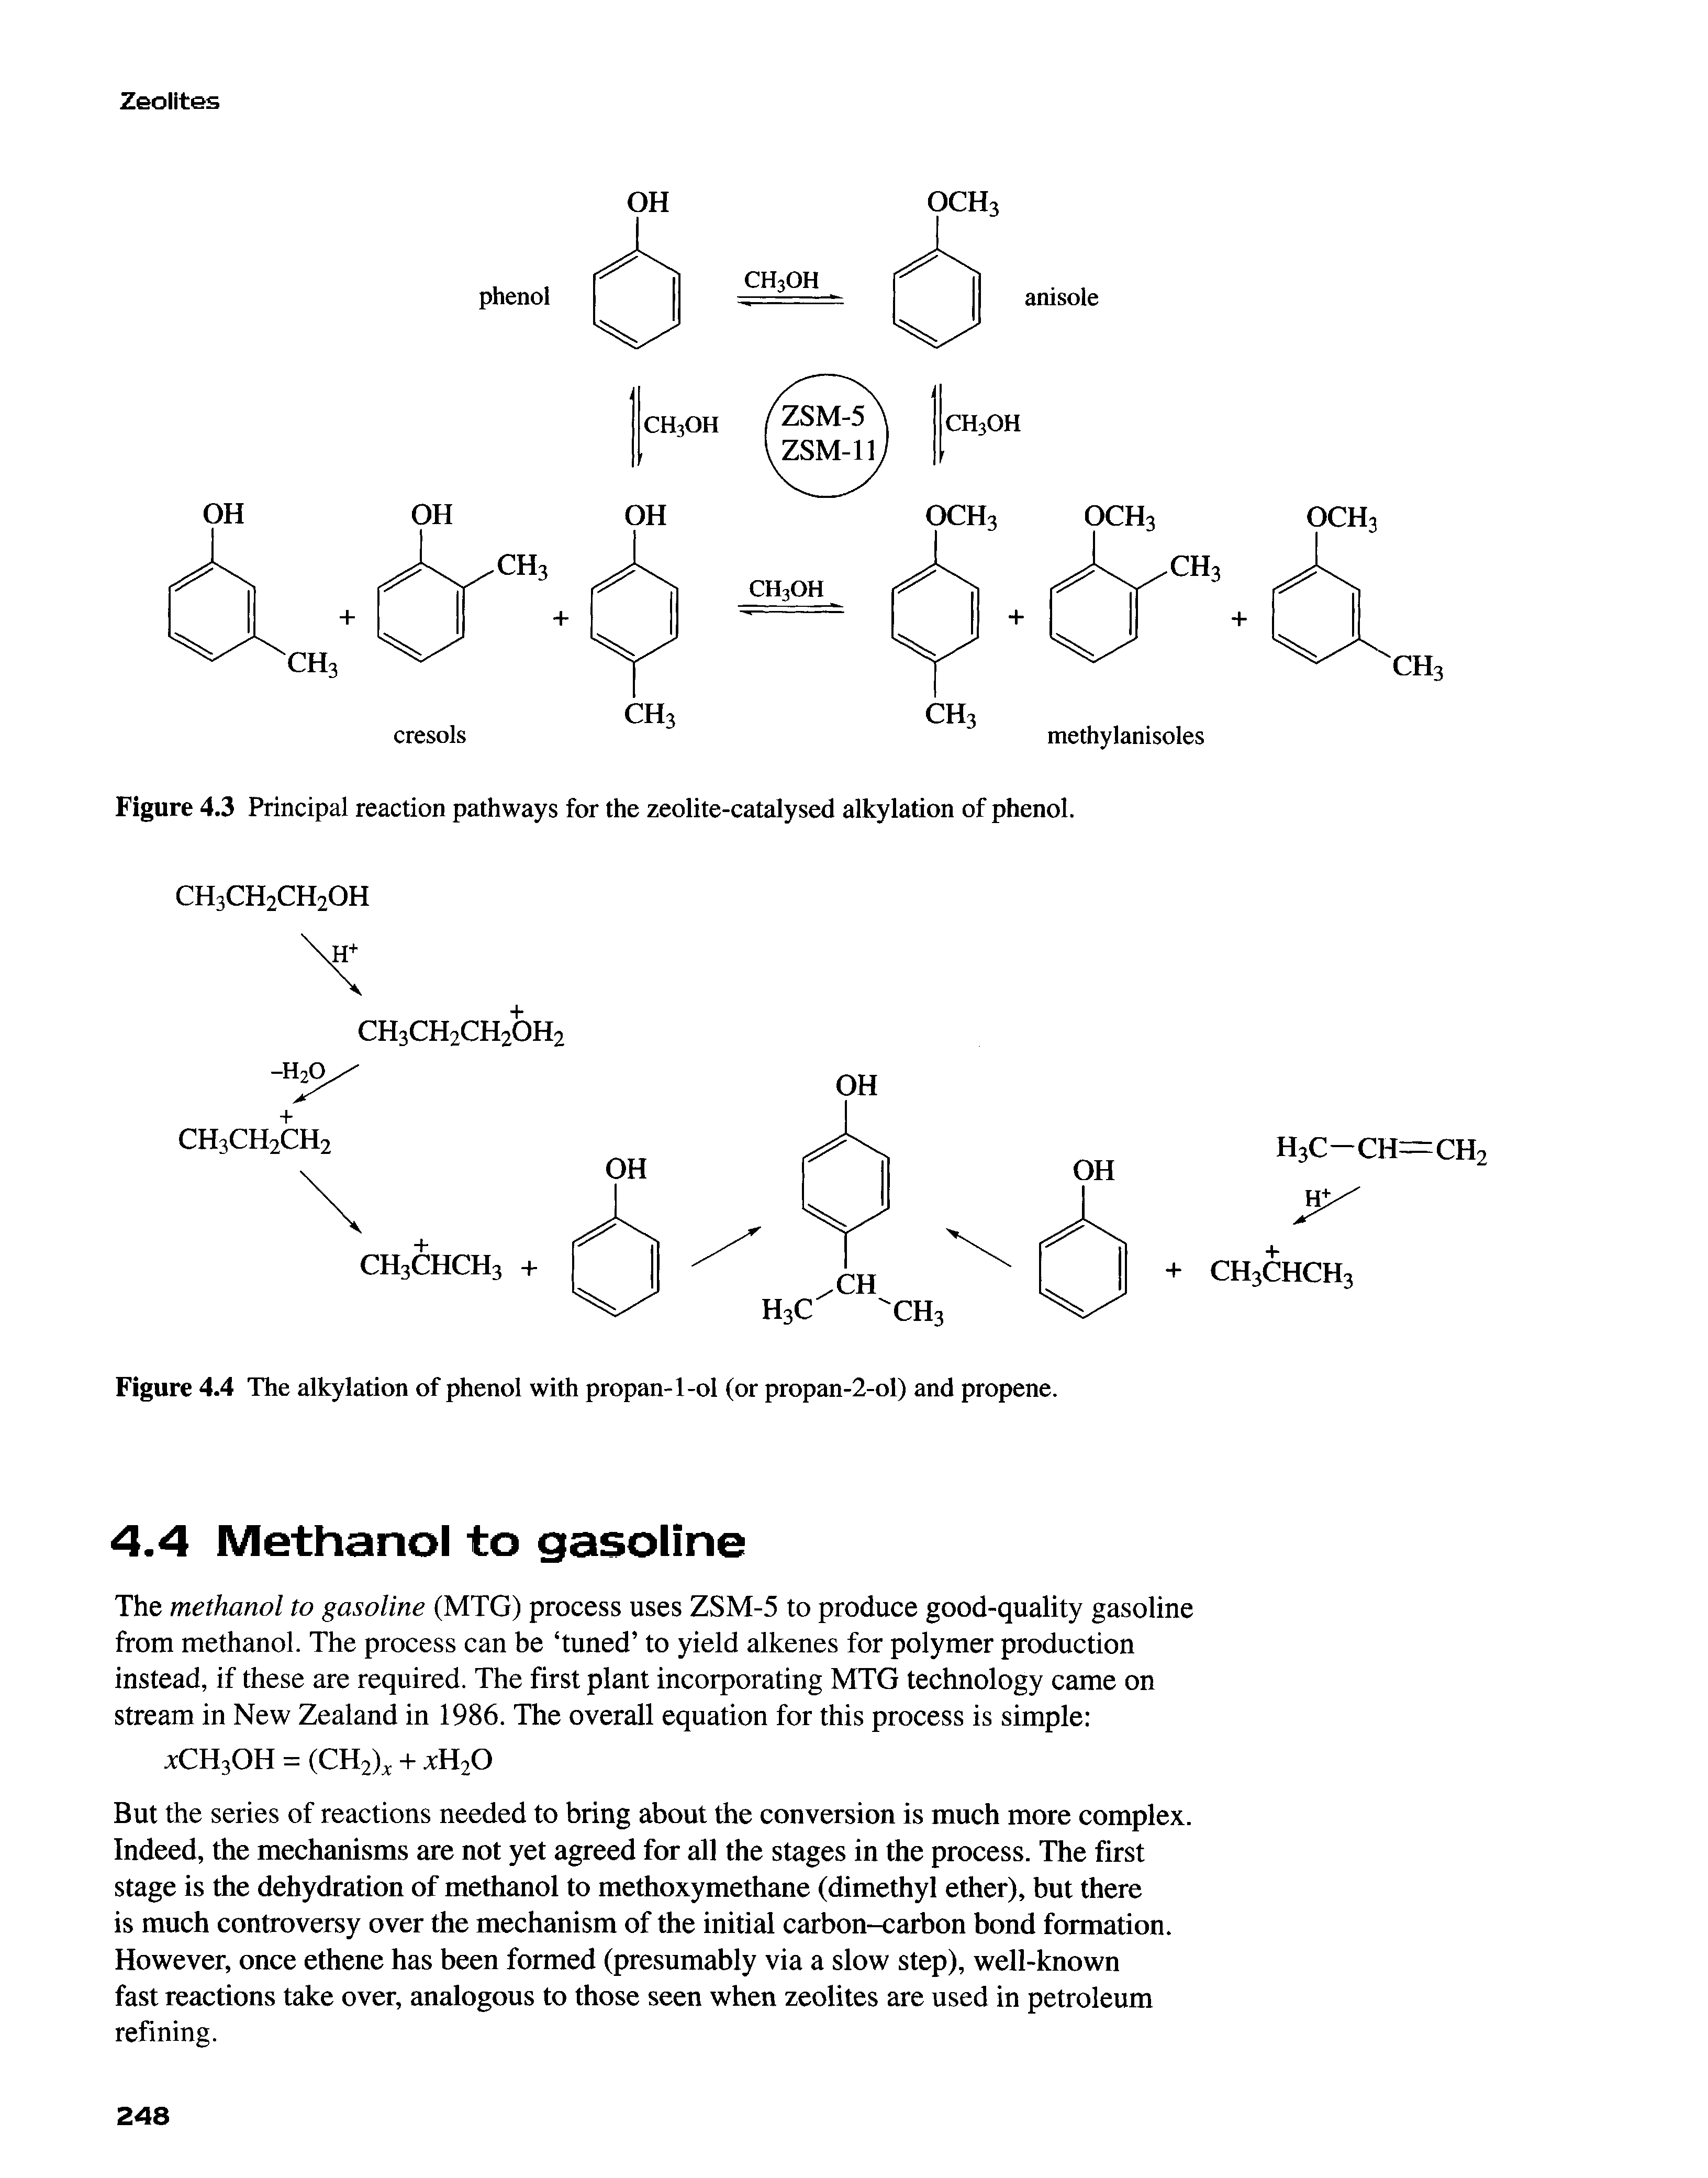 Figure 4.3 Principal reaction pathways for the zeolite-catalysed alkylation of phenol.